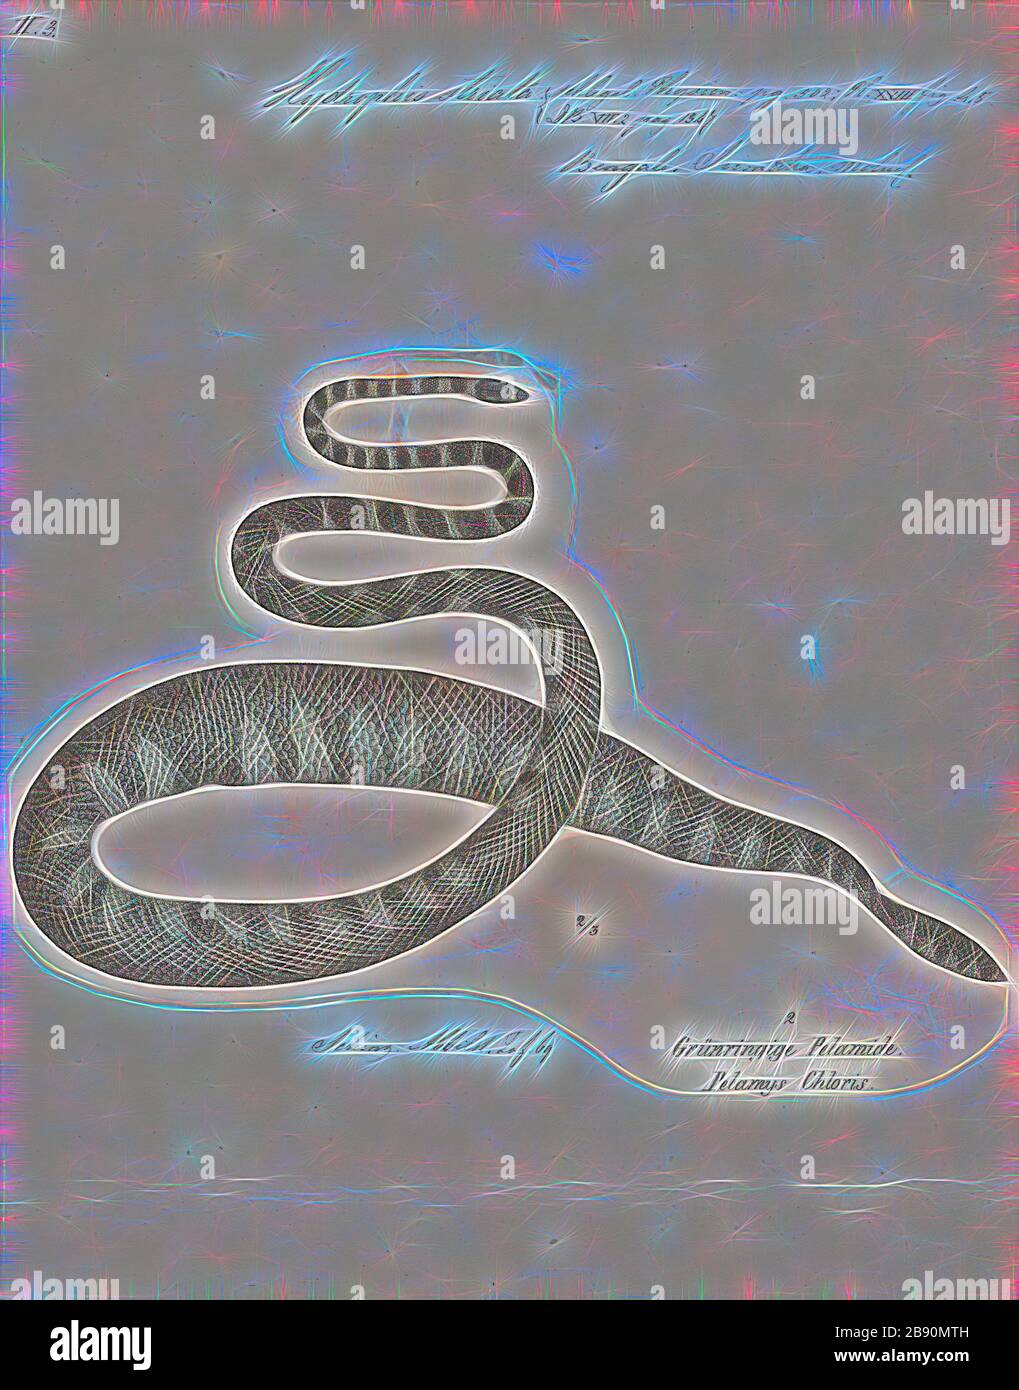 Hydrophis striata, Print, Hydrophis is a genus of sea snakes. They are typically found in Indo-Australian and Southeast Asian waters., 1700-1880, Reimagined by Gibon, design of warm cheerful glowing of brightness and light rays radiance. Classic art reinvented with a modern twist. Photography inspired by futurism, embracing dynamic energy of modern technology, movement, speed and revolutionize culture. Stock Photo